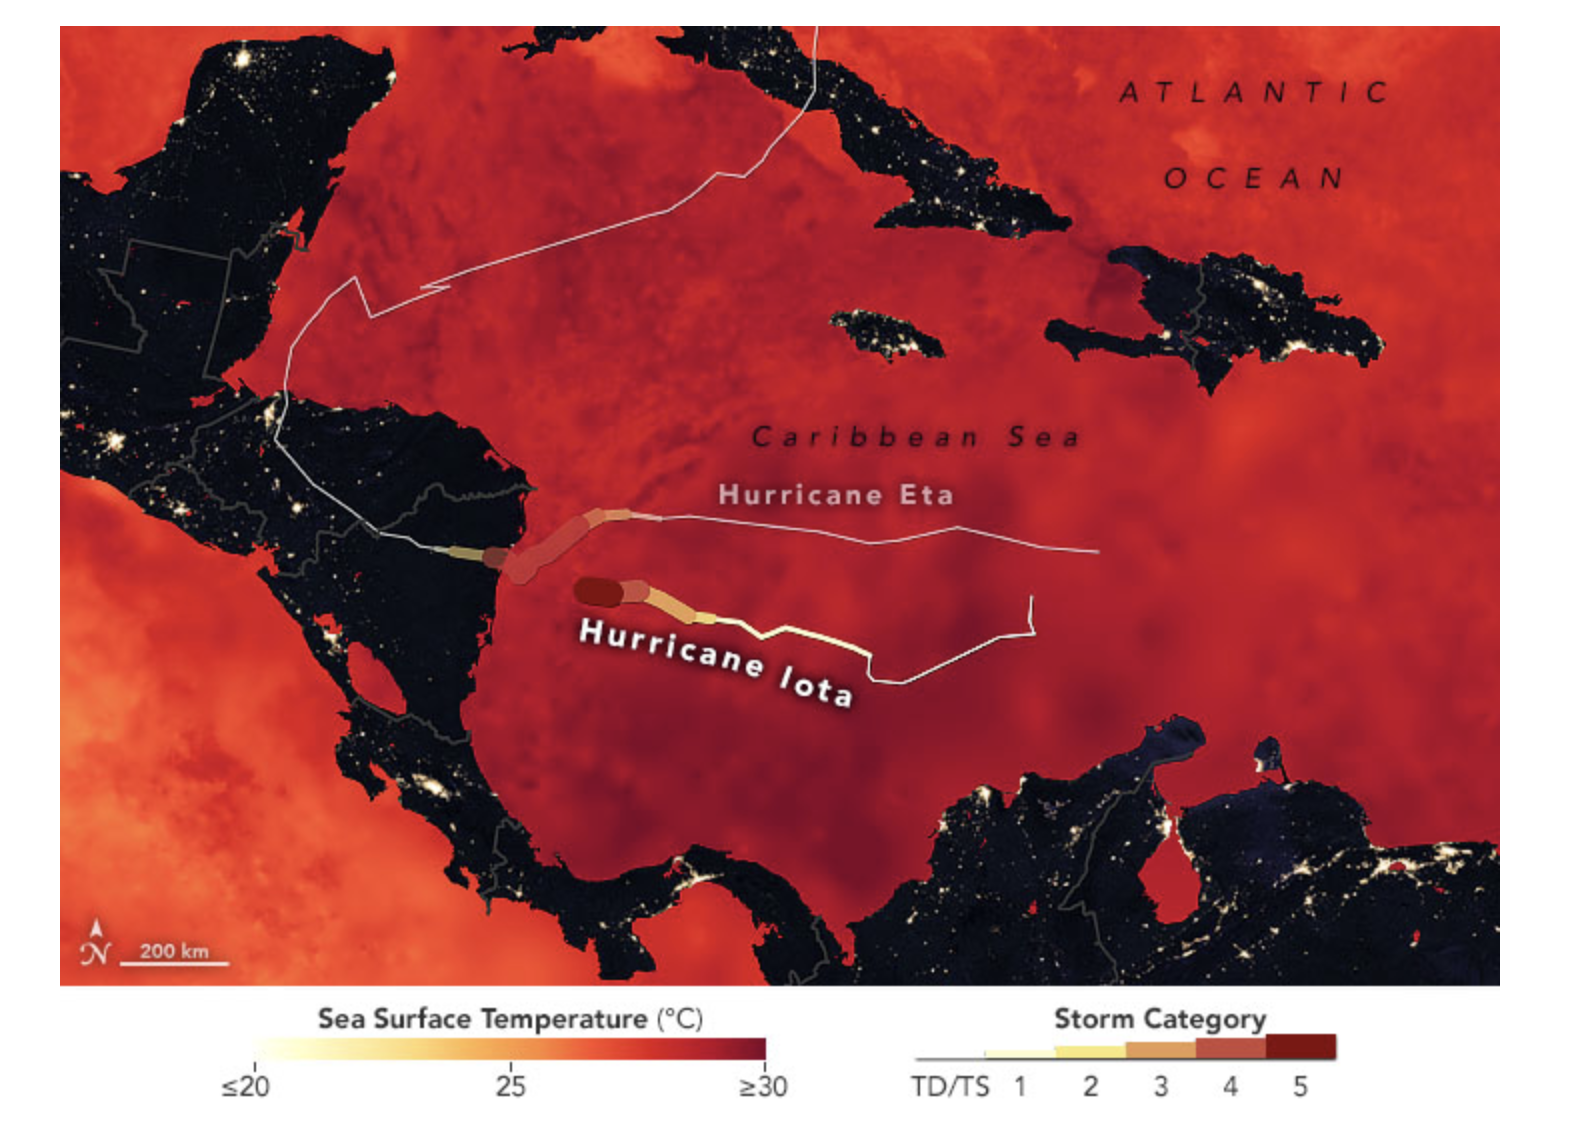 A map showing the tracks of Hurricane Iota and Hurricane Eta overlaid on a map of sea surface temperatures in the Caribbean Sea and the Gulf of Mexico as measured on Nov. 15, 2020.